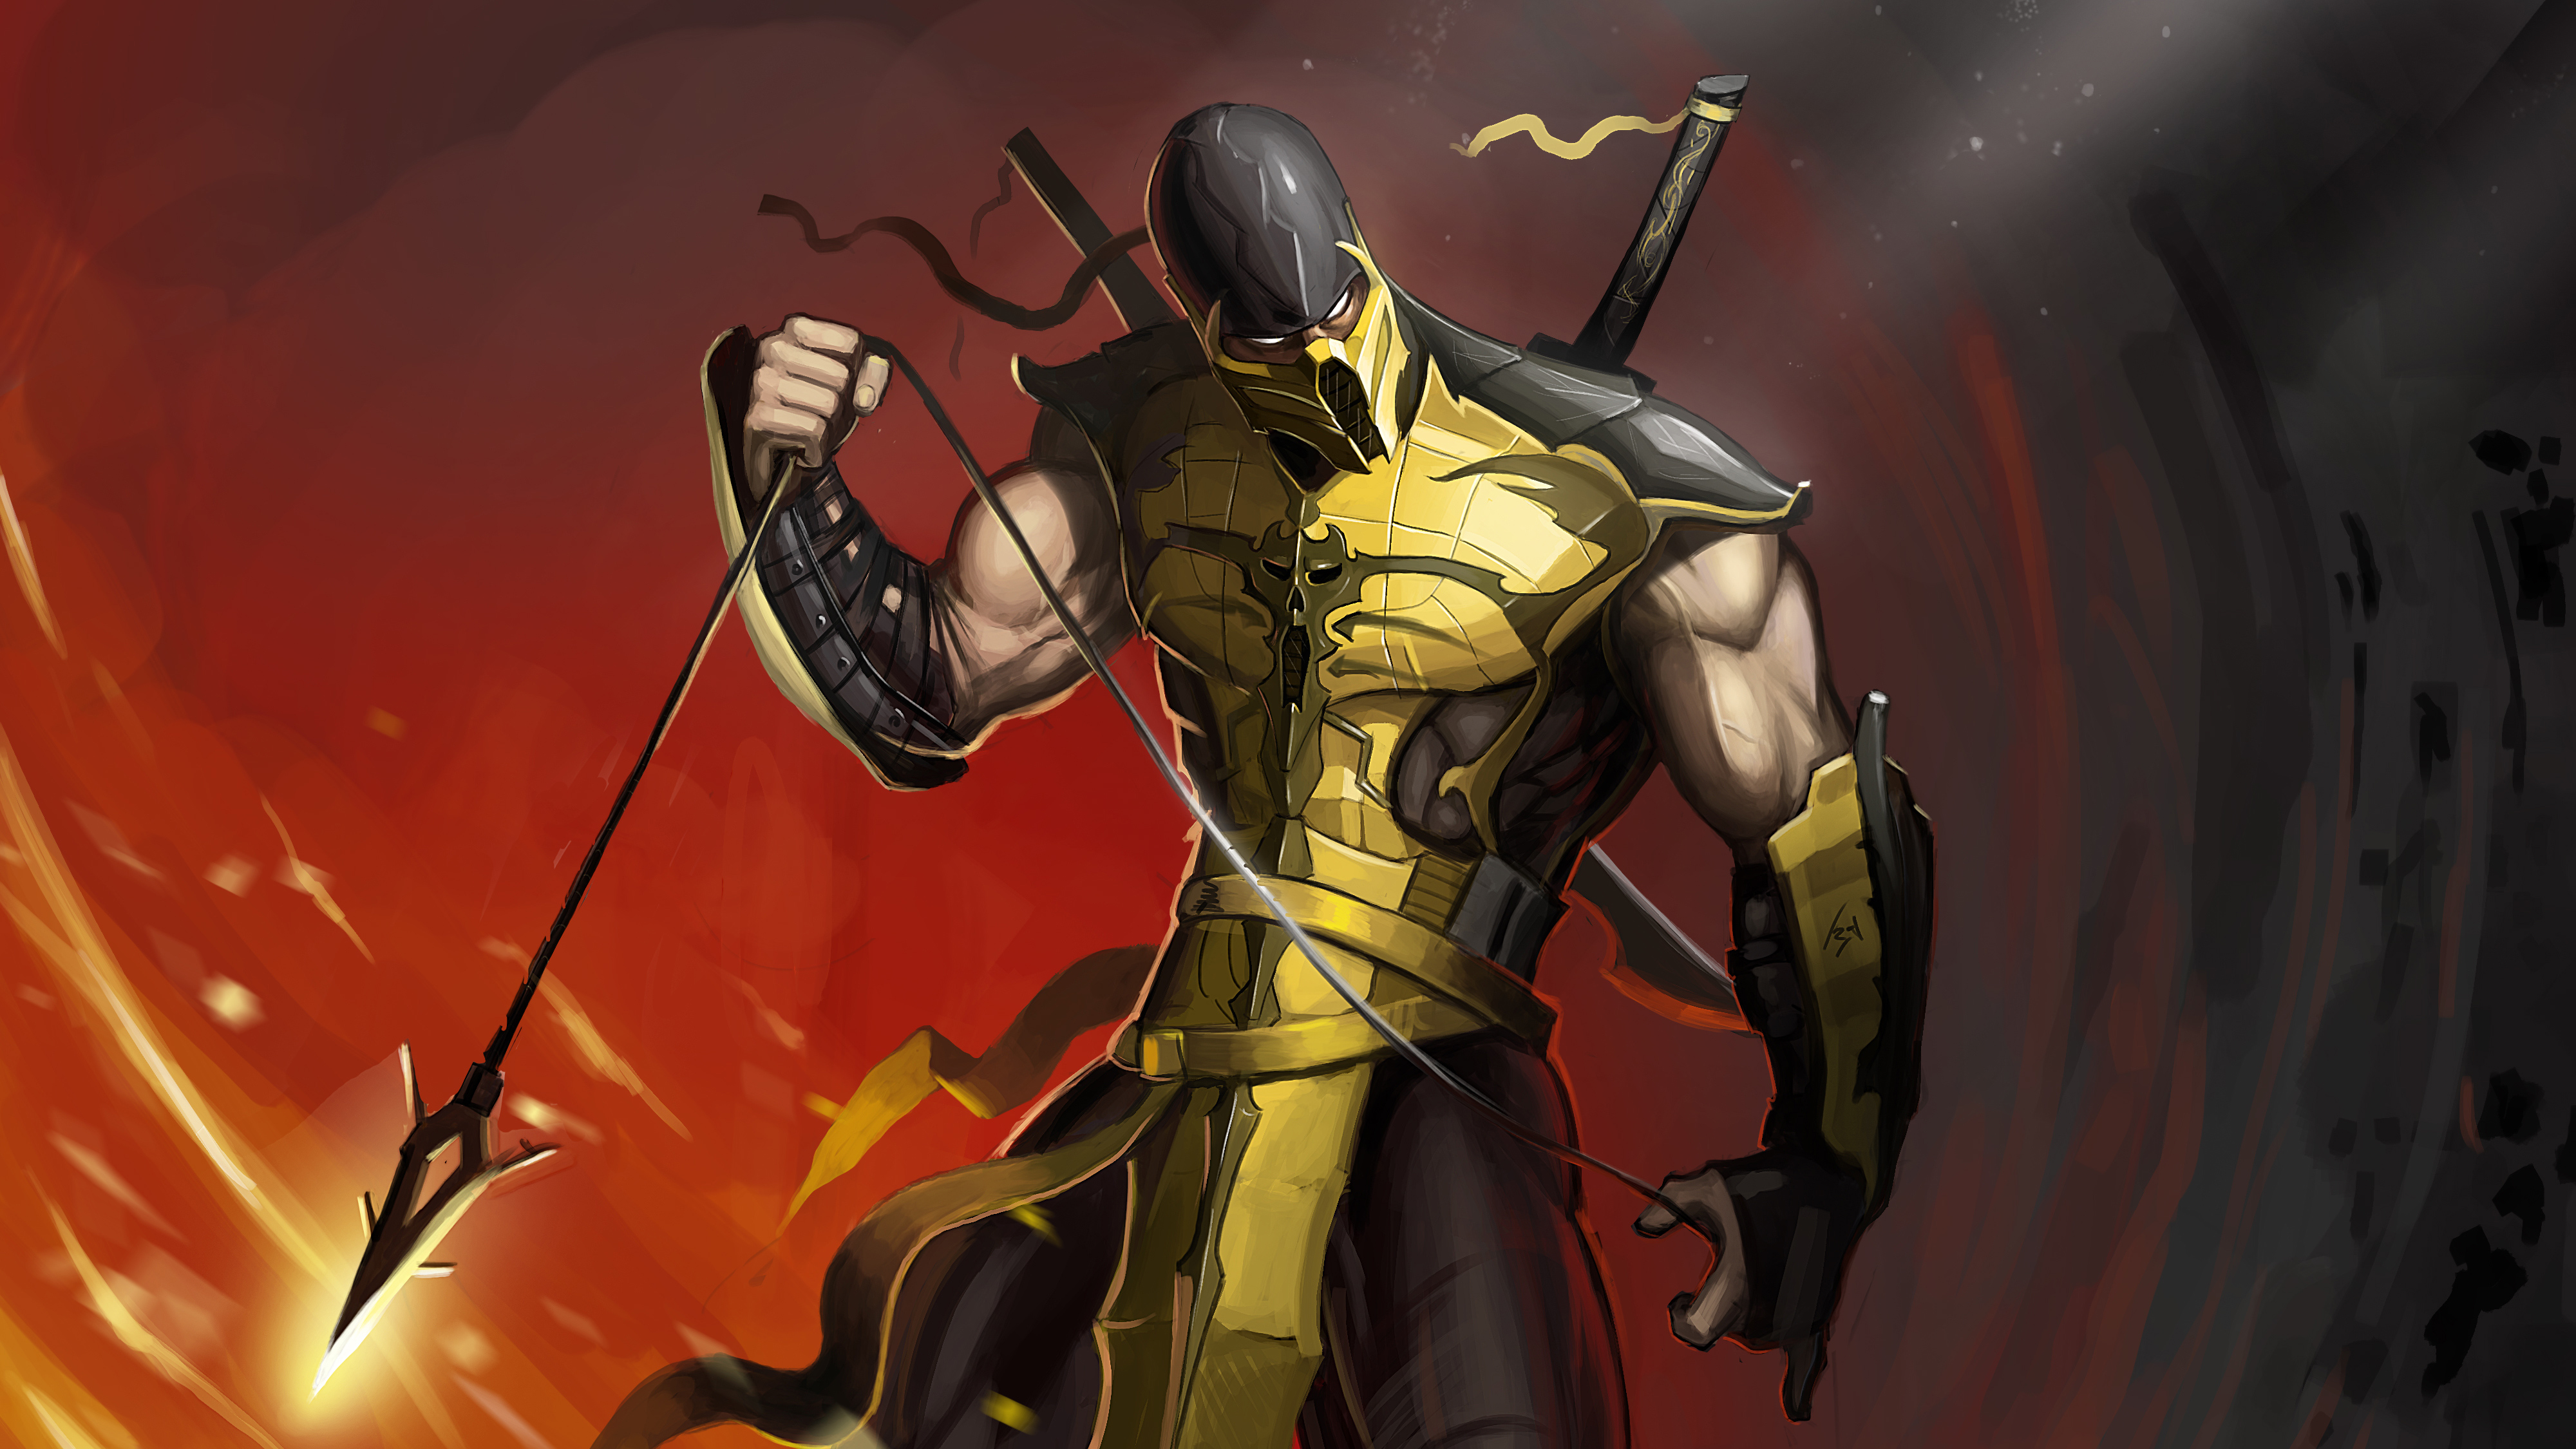 Download wallpapers and images scorpion, ninja, mortal kombat, fire, stand  for the desktop in resolution 480x960